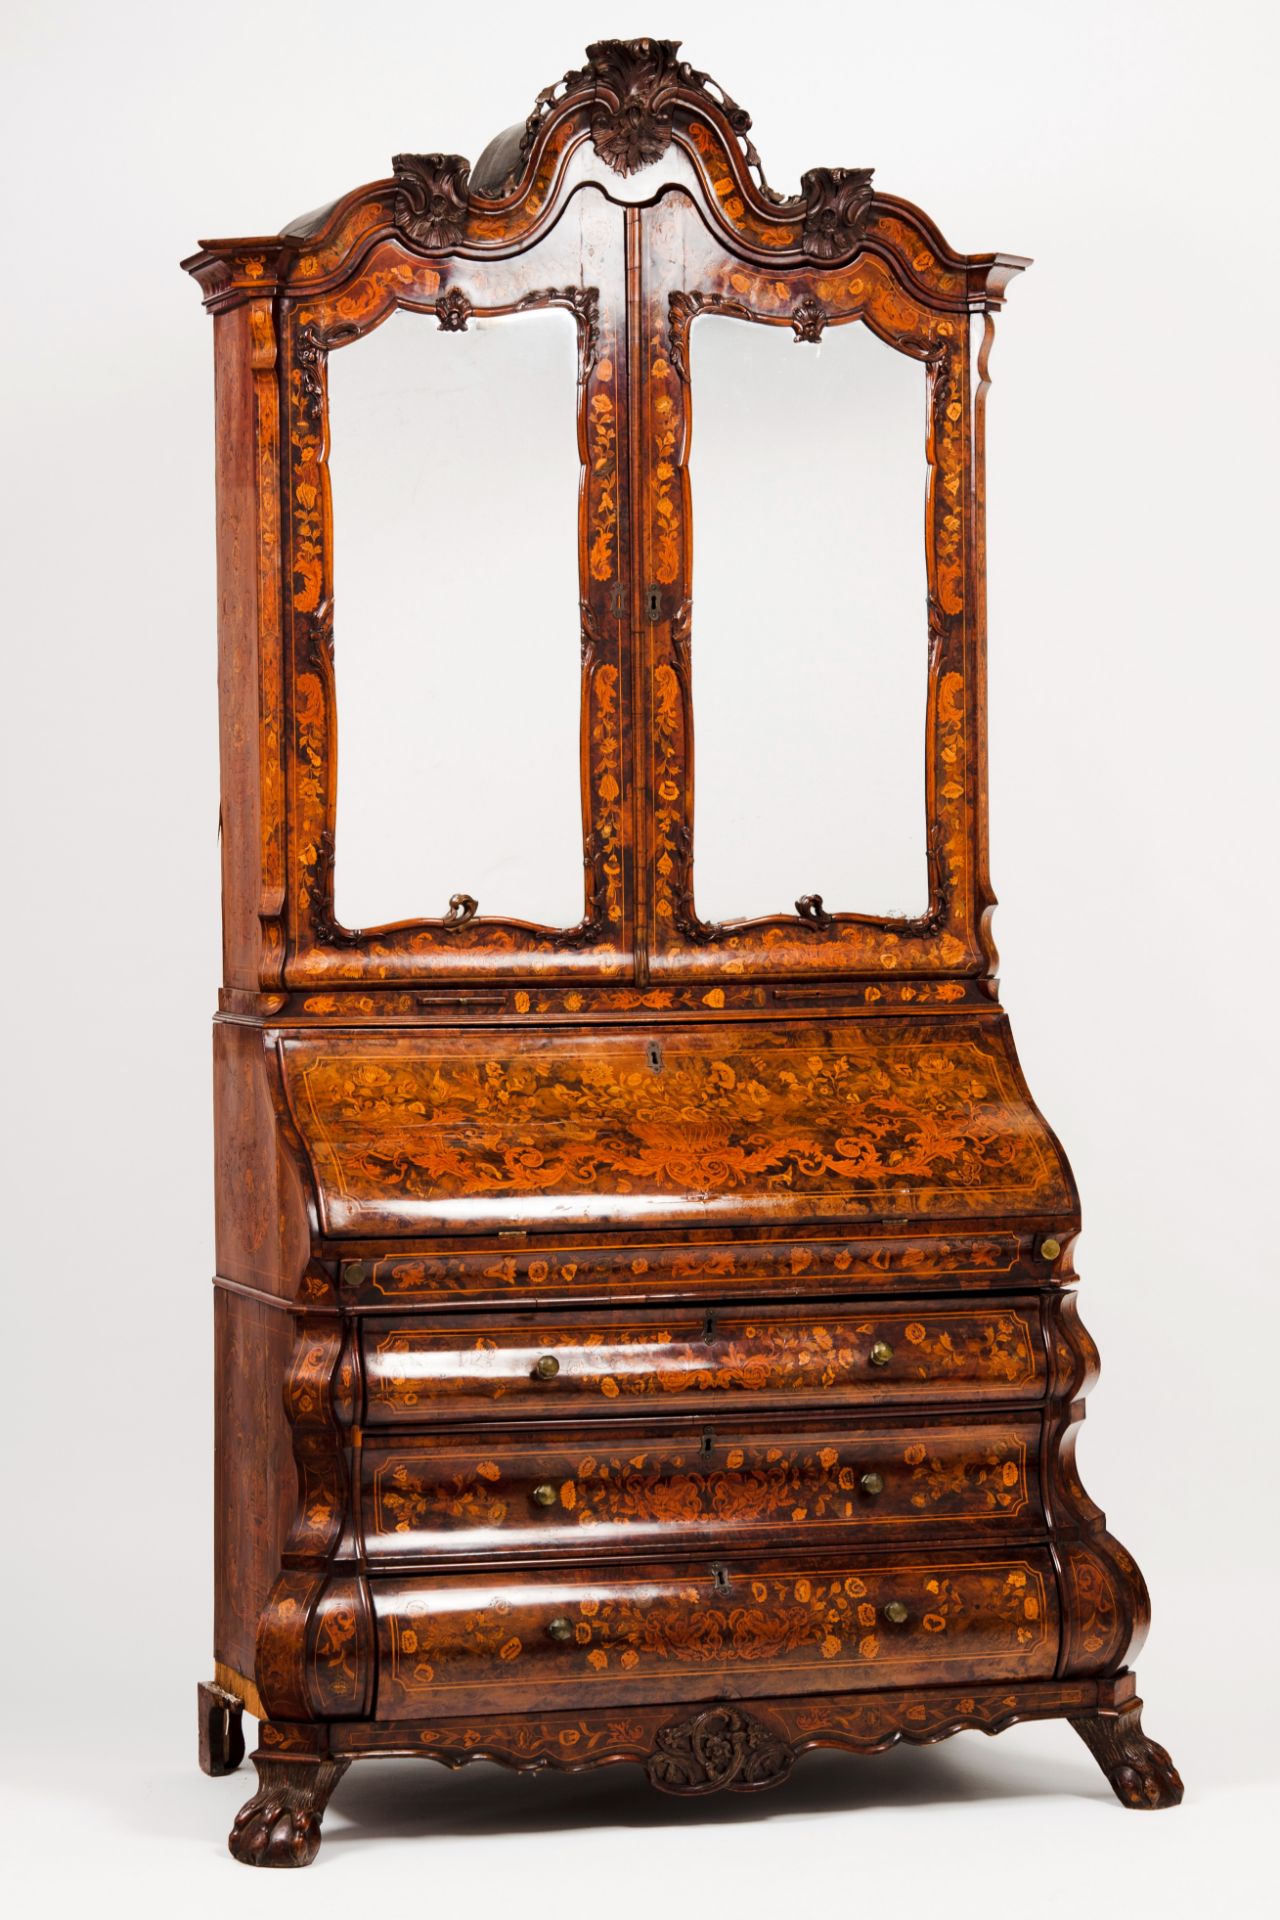 A Dutch marquetry bureau bookcaseWalnut and burr-walnut root veneered Richly decorated with